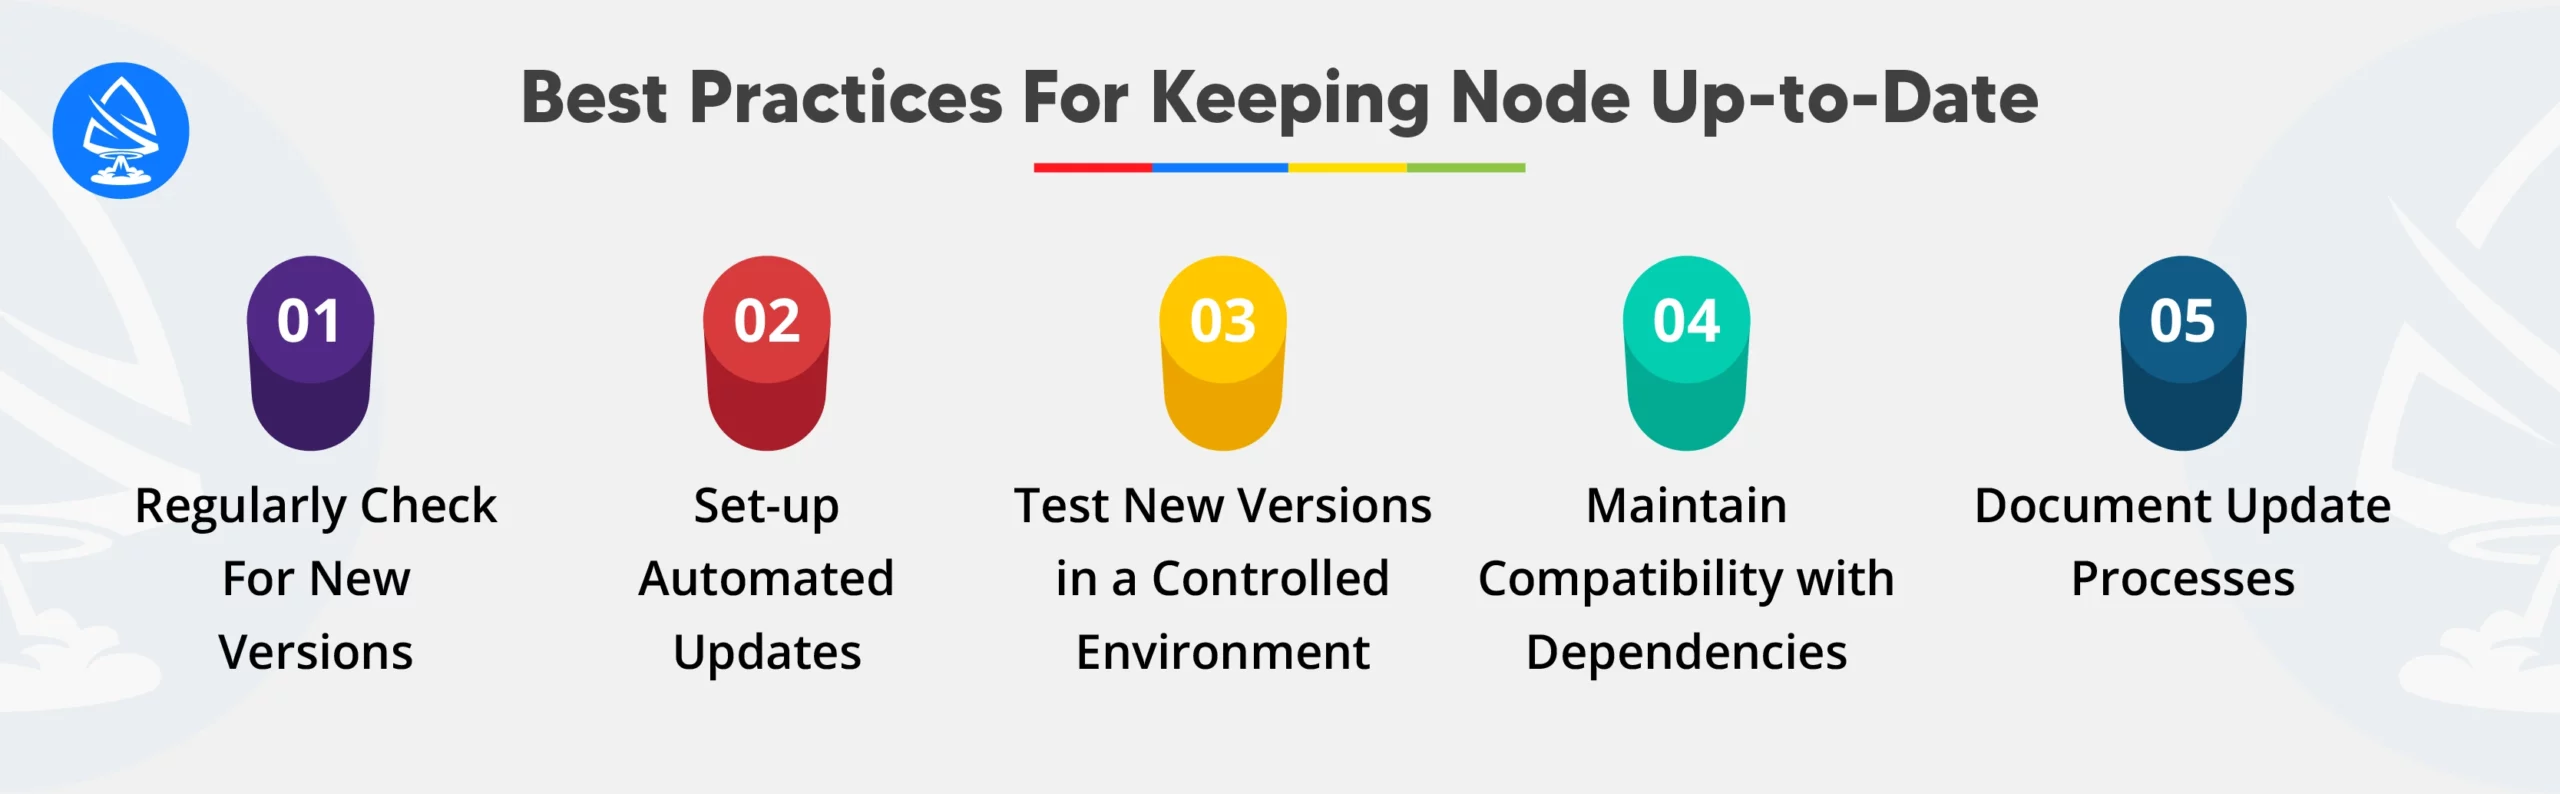 Best practices for keeping node up to date